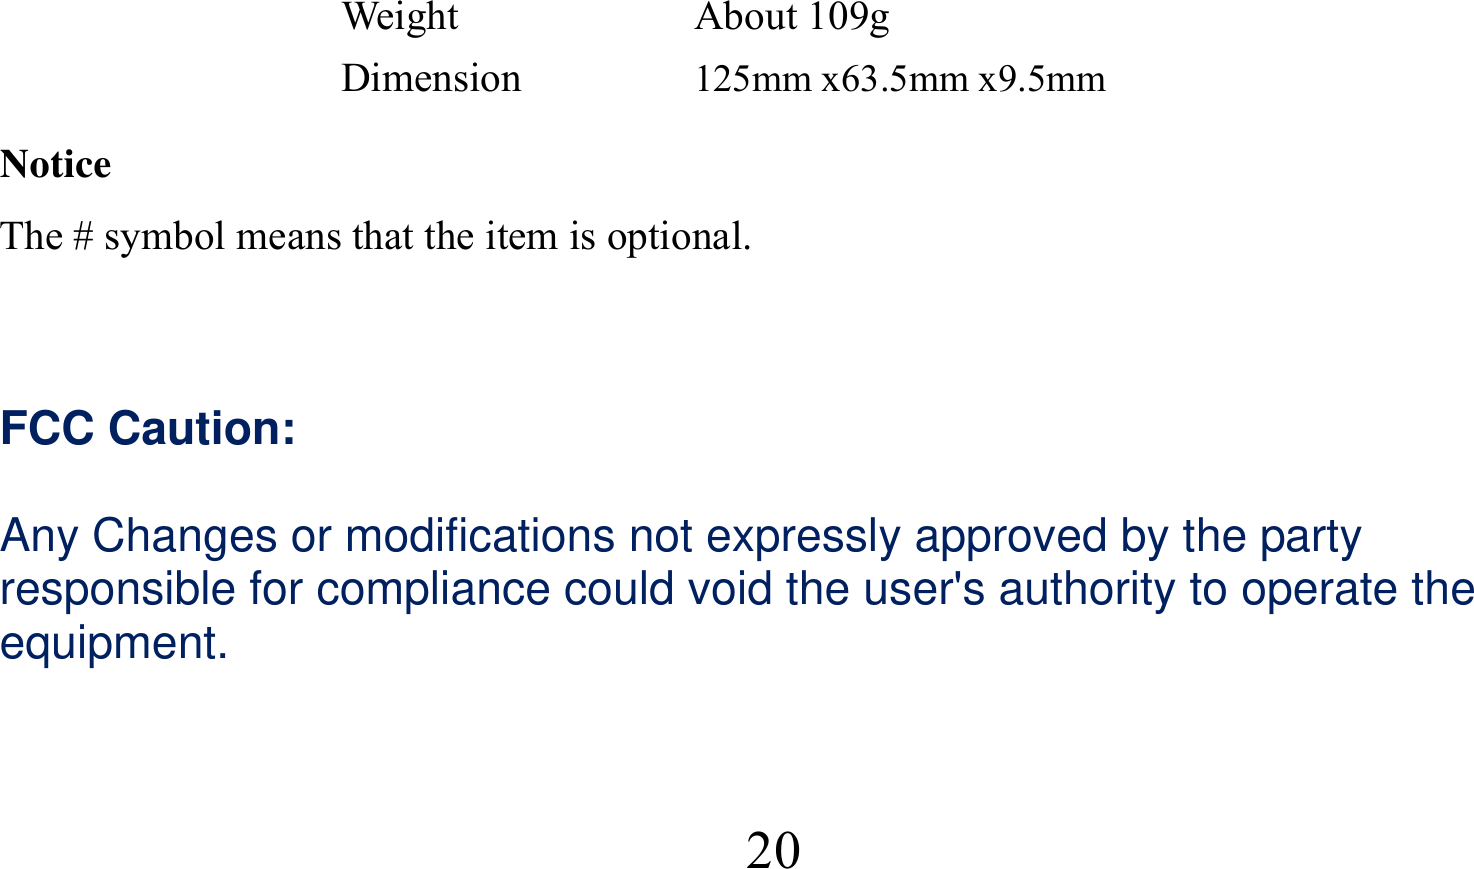  20Weight About 109g Dimension  125mm x63.5mm x9.5mm Notice The # symbol means that the item is optional.   FCC Caution:  Any Changes or modifications not expressly approved by the party responsible for compliance could void the user&apos;s authority to operate the equipment.    